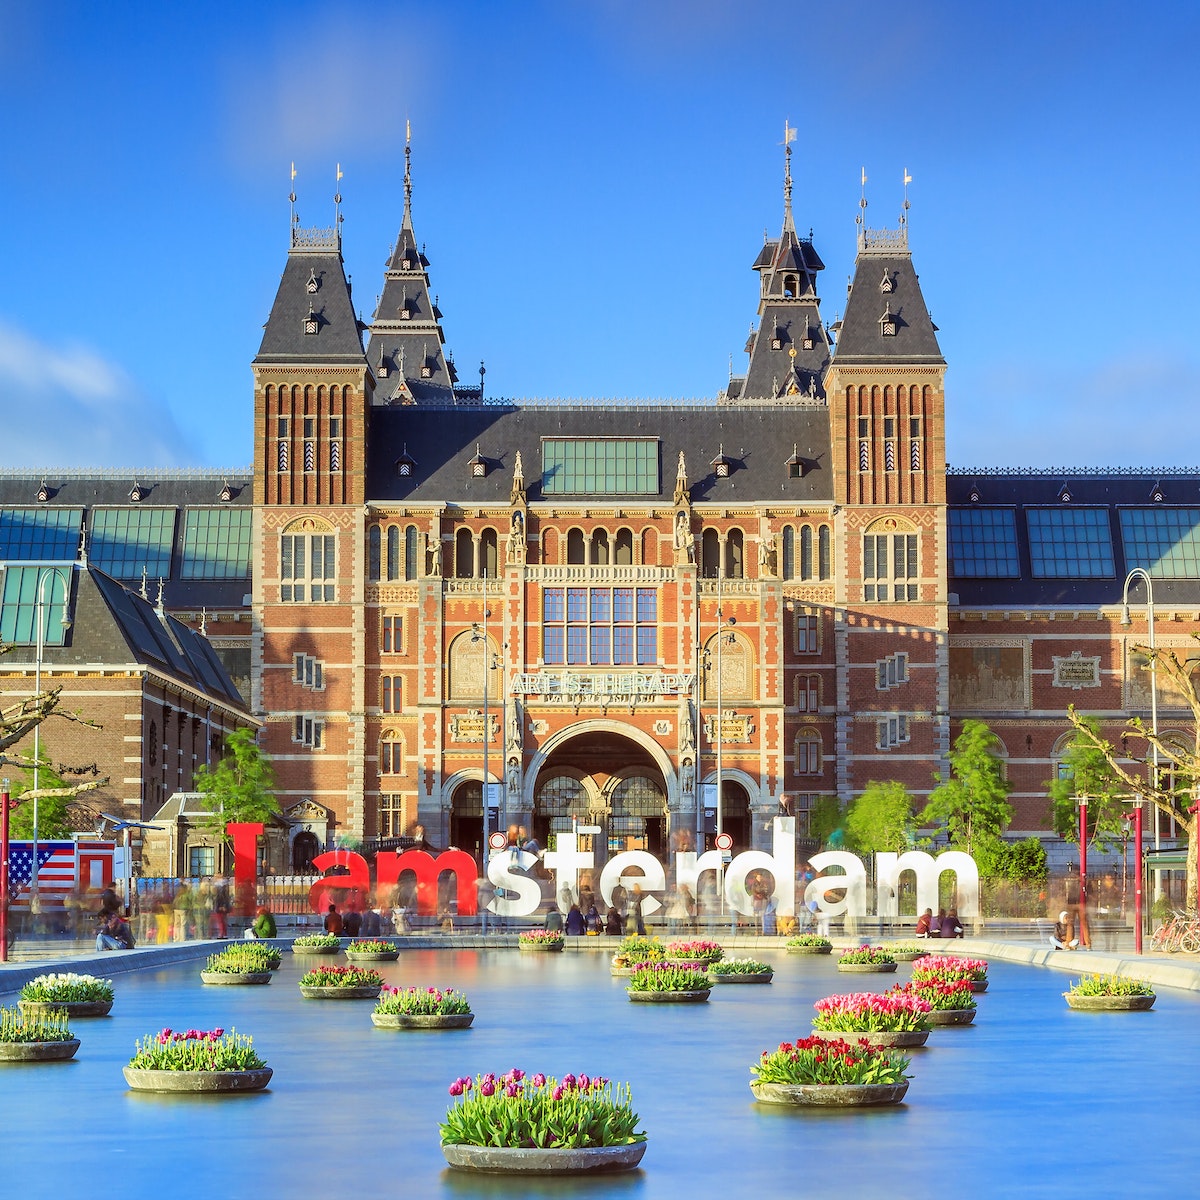 Rijksmuseum with tulips in Amsterdam..NOTE: dated image - "iamamsterdam" sign has been removed from outside museum.